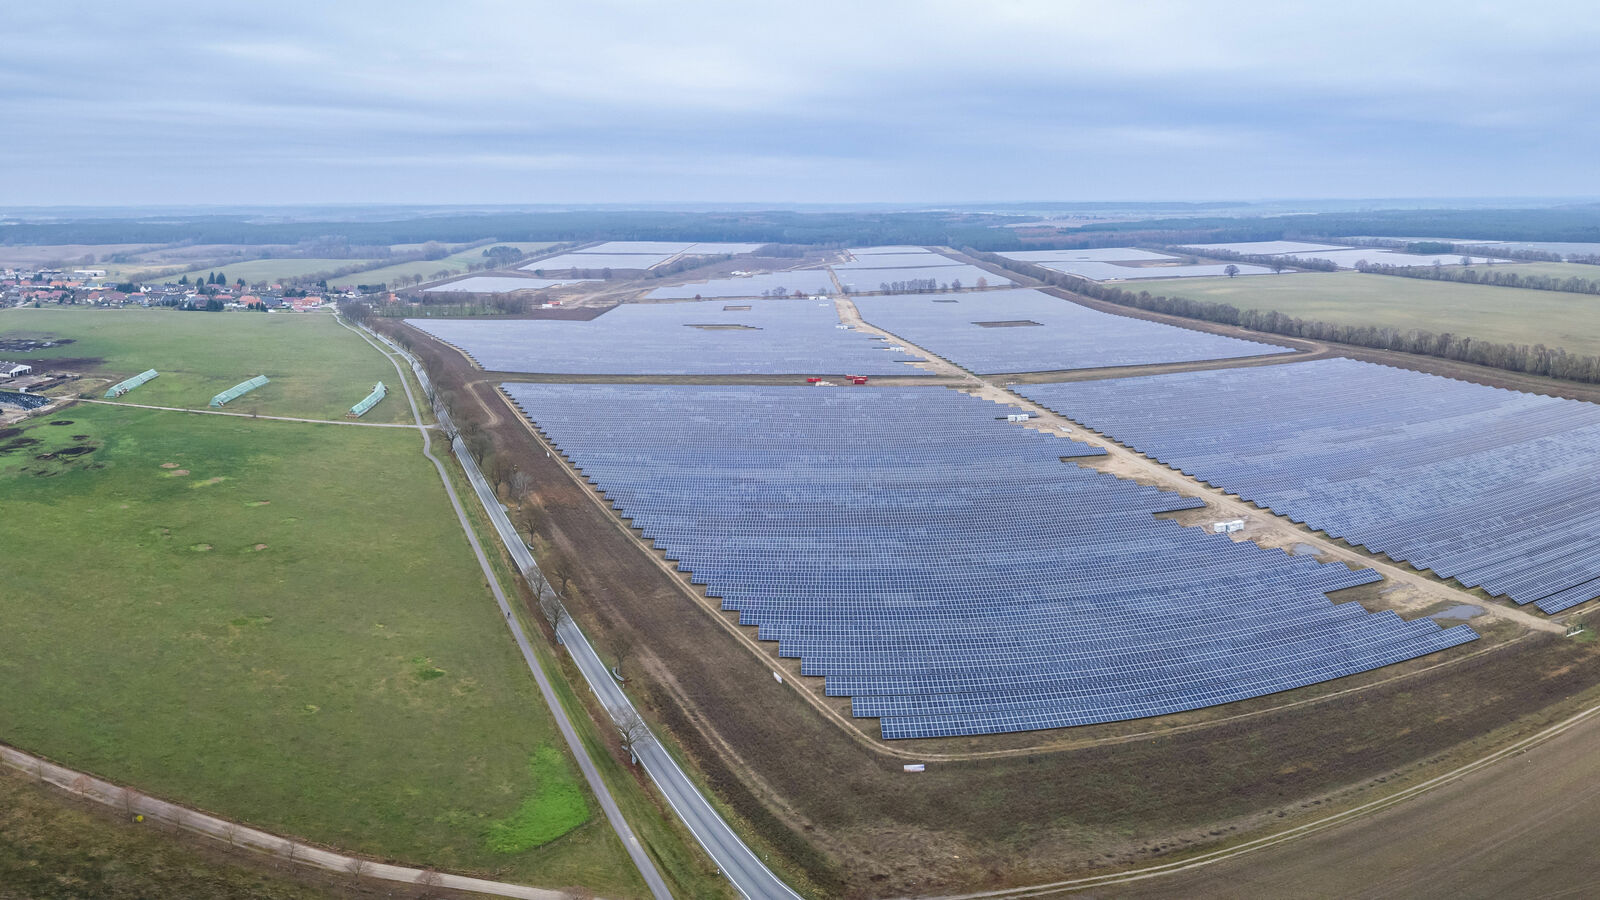 Huge solar park in Mecklenburg: Soon the sun will supply electric cars with clean energy here